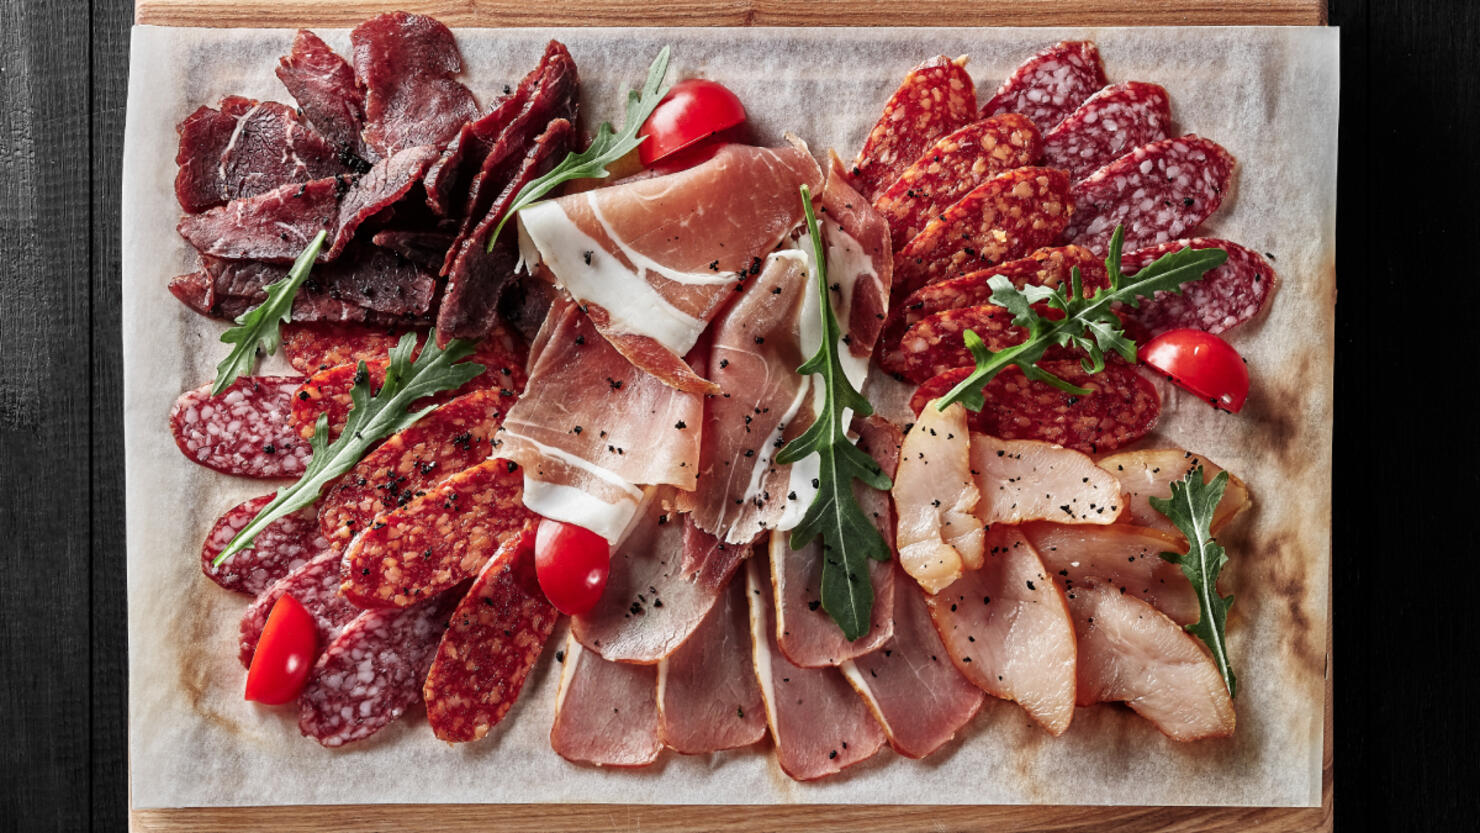 Charcuterie: How to avoid Salmonella in charcuterie boards